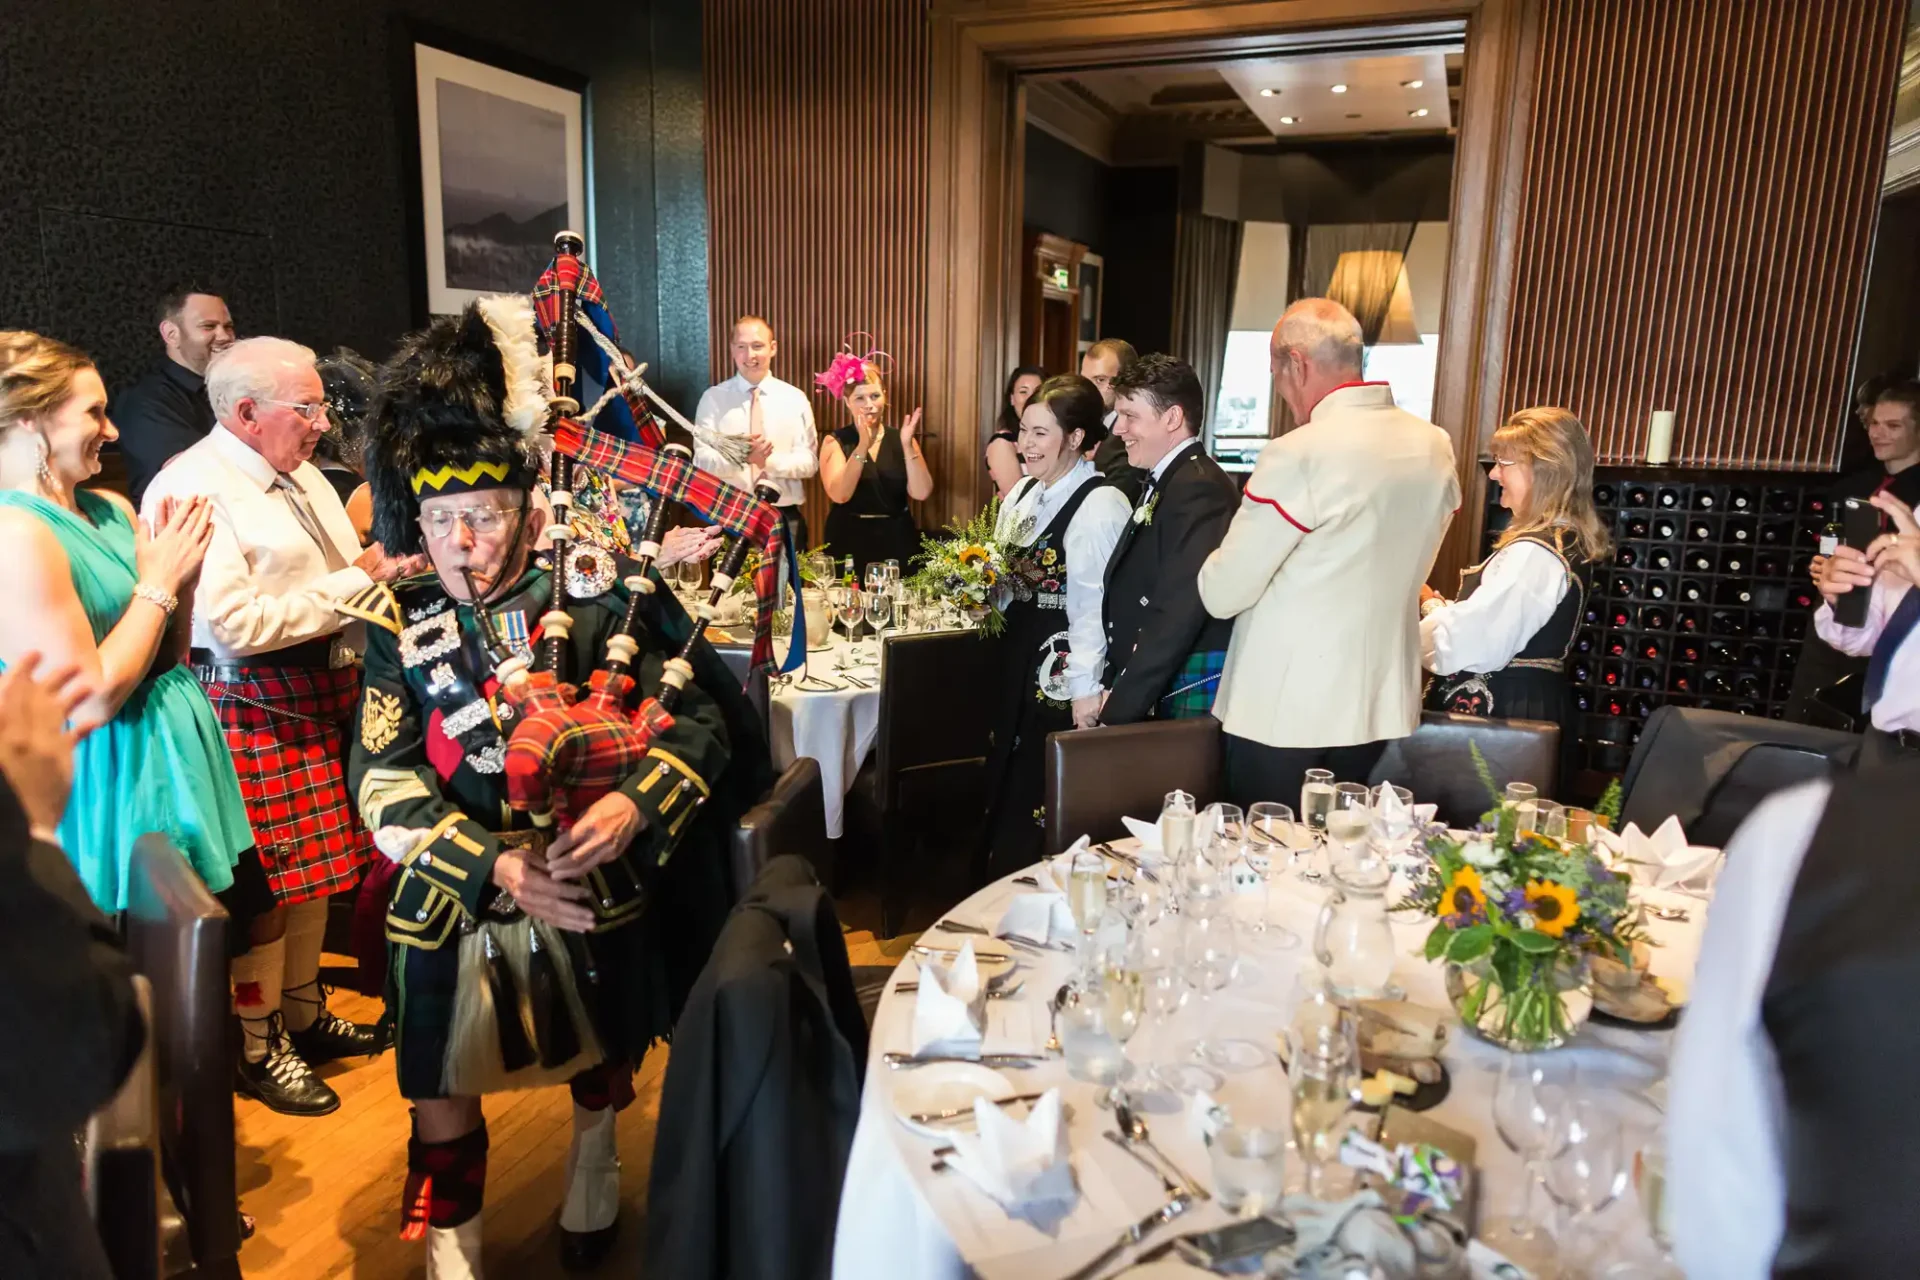 A man in traditional scottish attire playing bagpipes at a lively event inside a dining room with guests enjoying the performance.